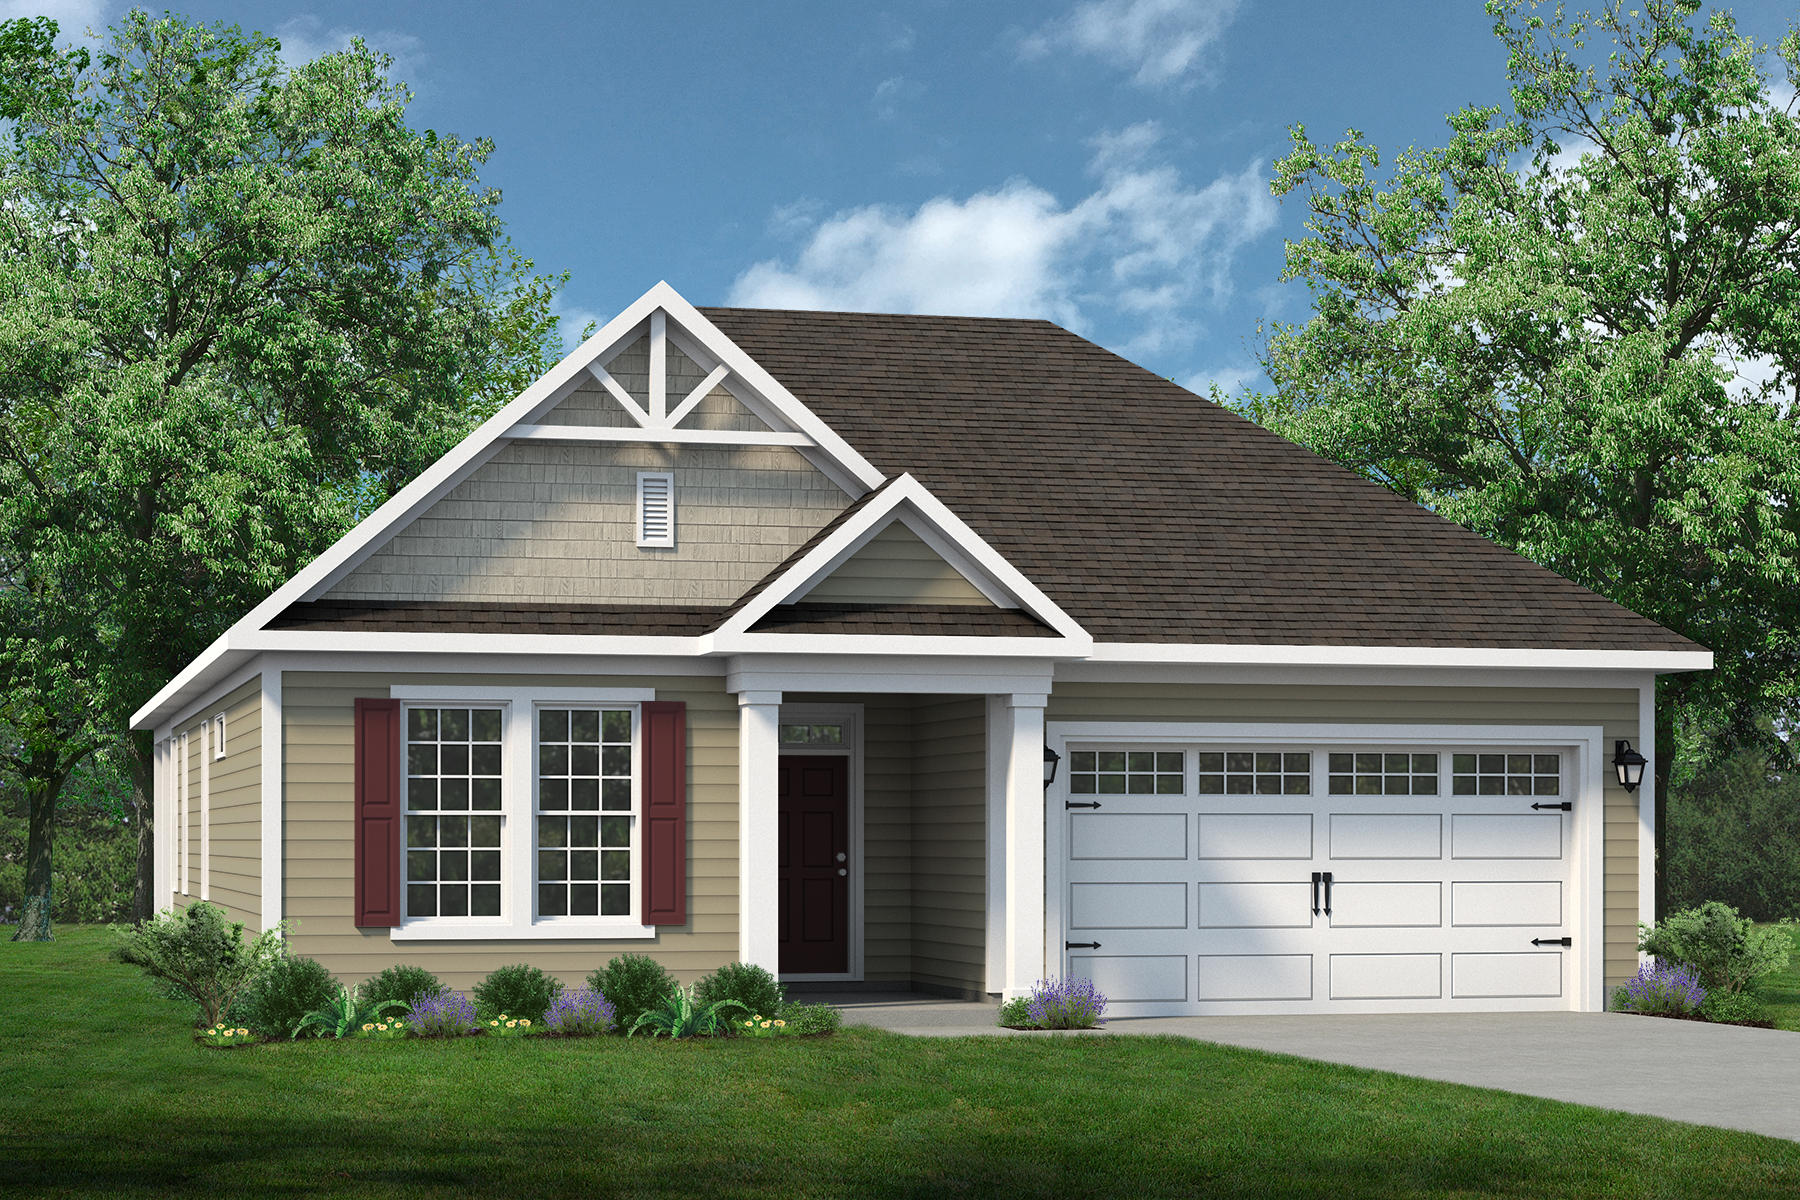 Elevation C. 1,938sf New Home in Bolivia, NC